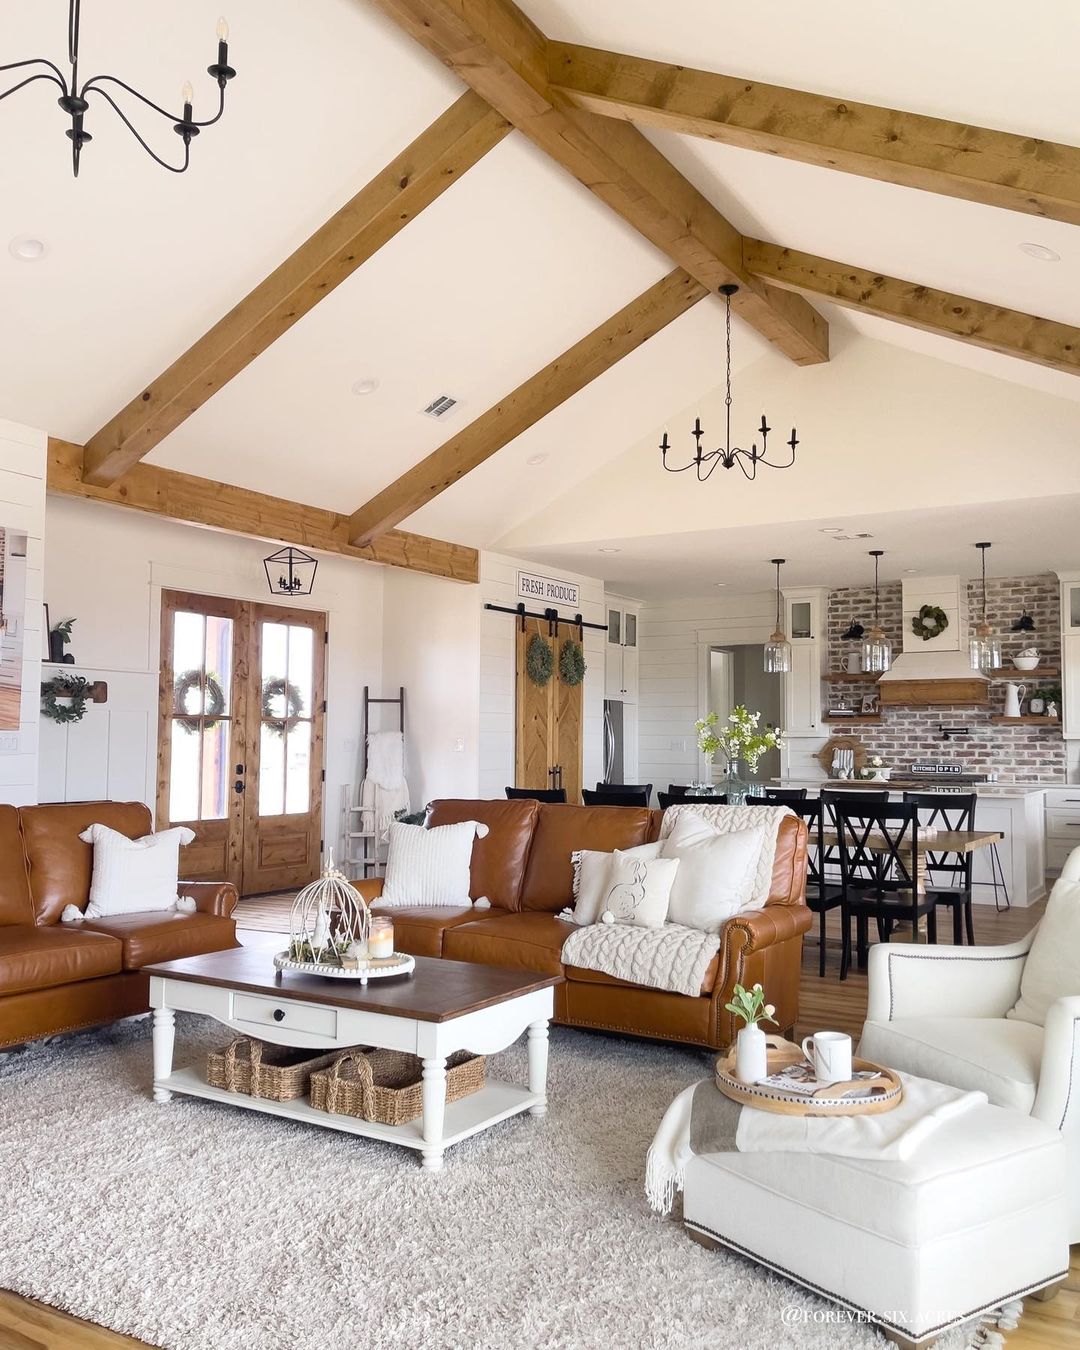 Farmhouse style living room with brown and white color scheme. Photo by Instagram user @forever.six.acres